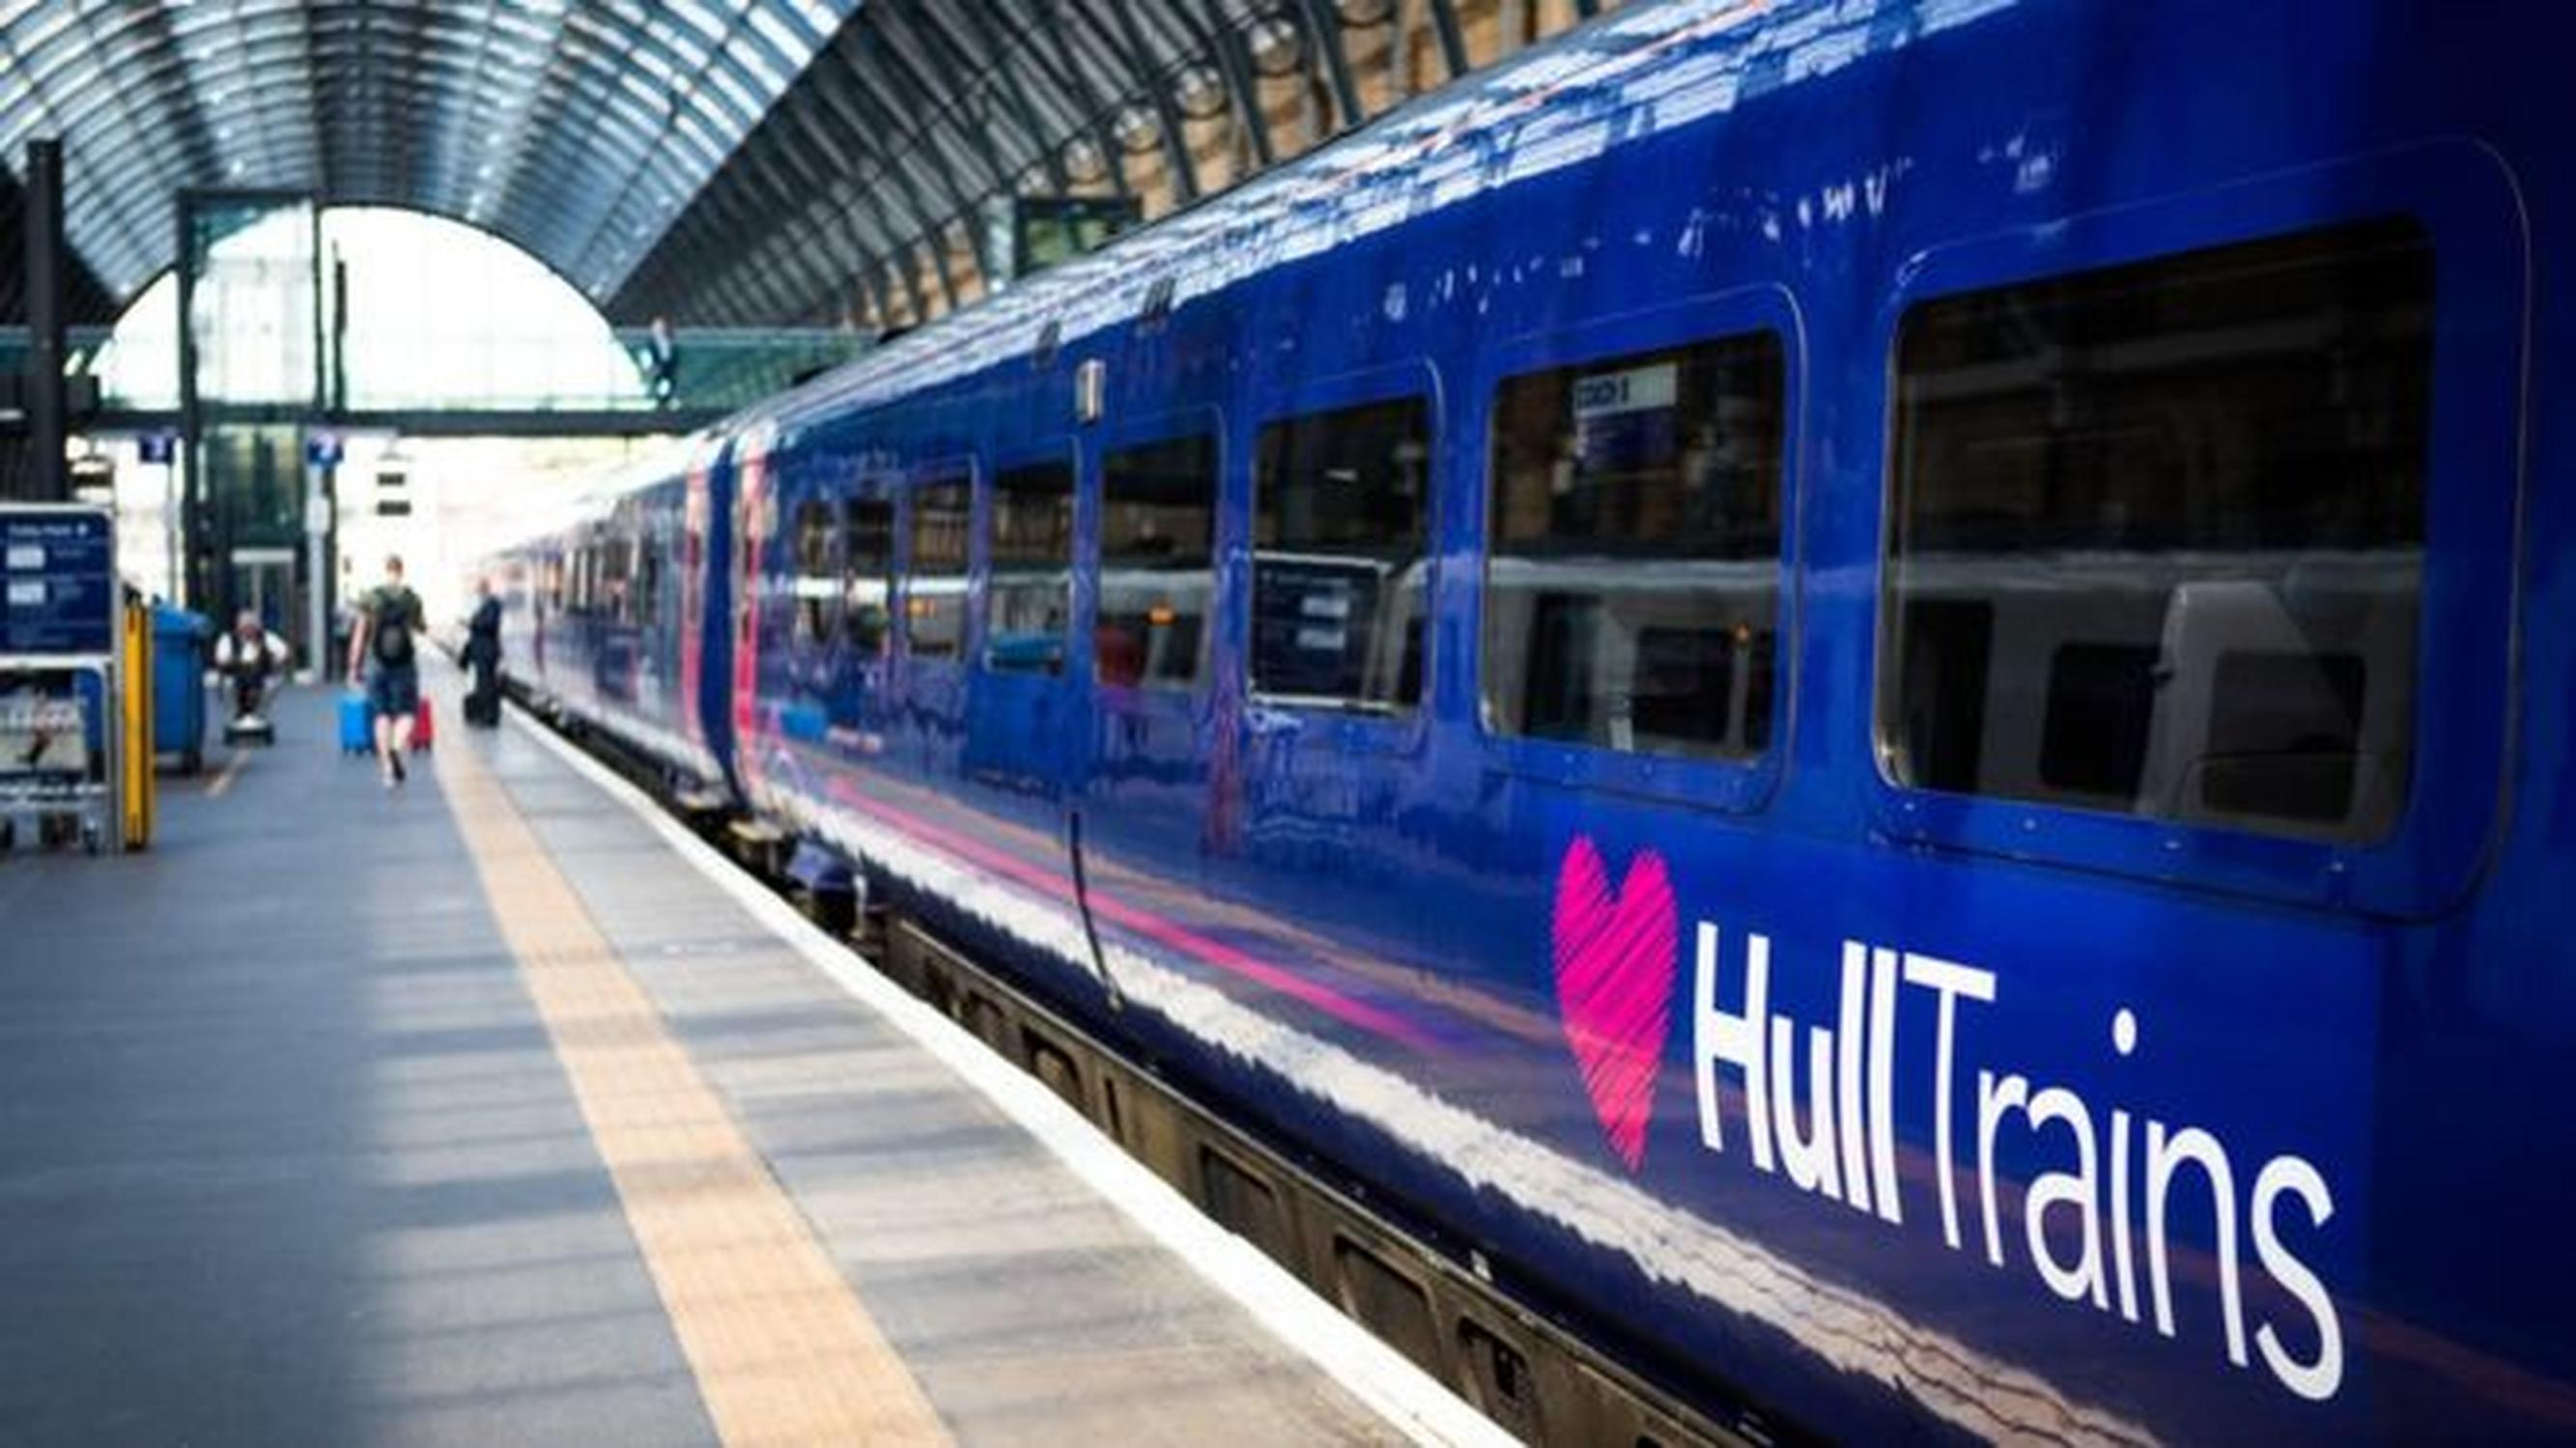 Hull Trains is an open access operator